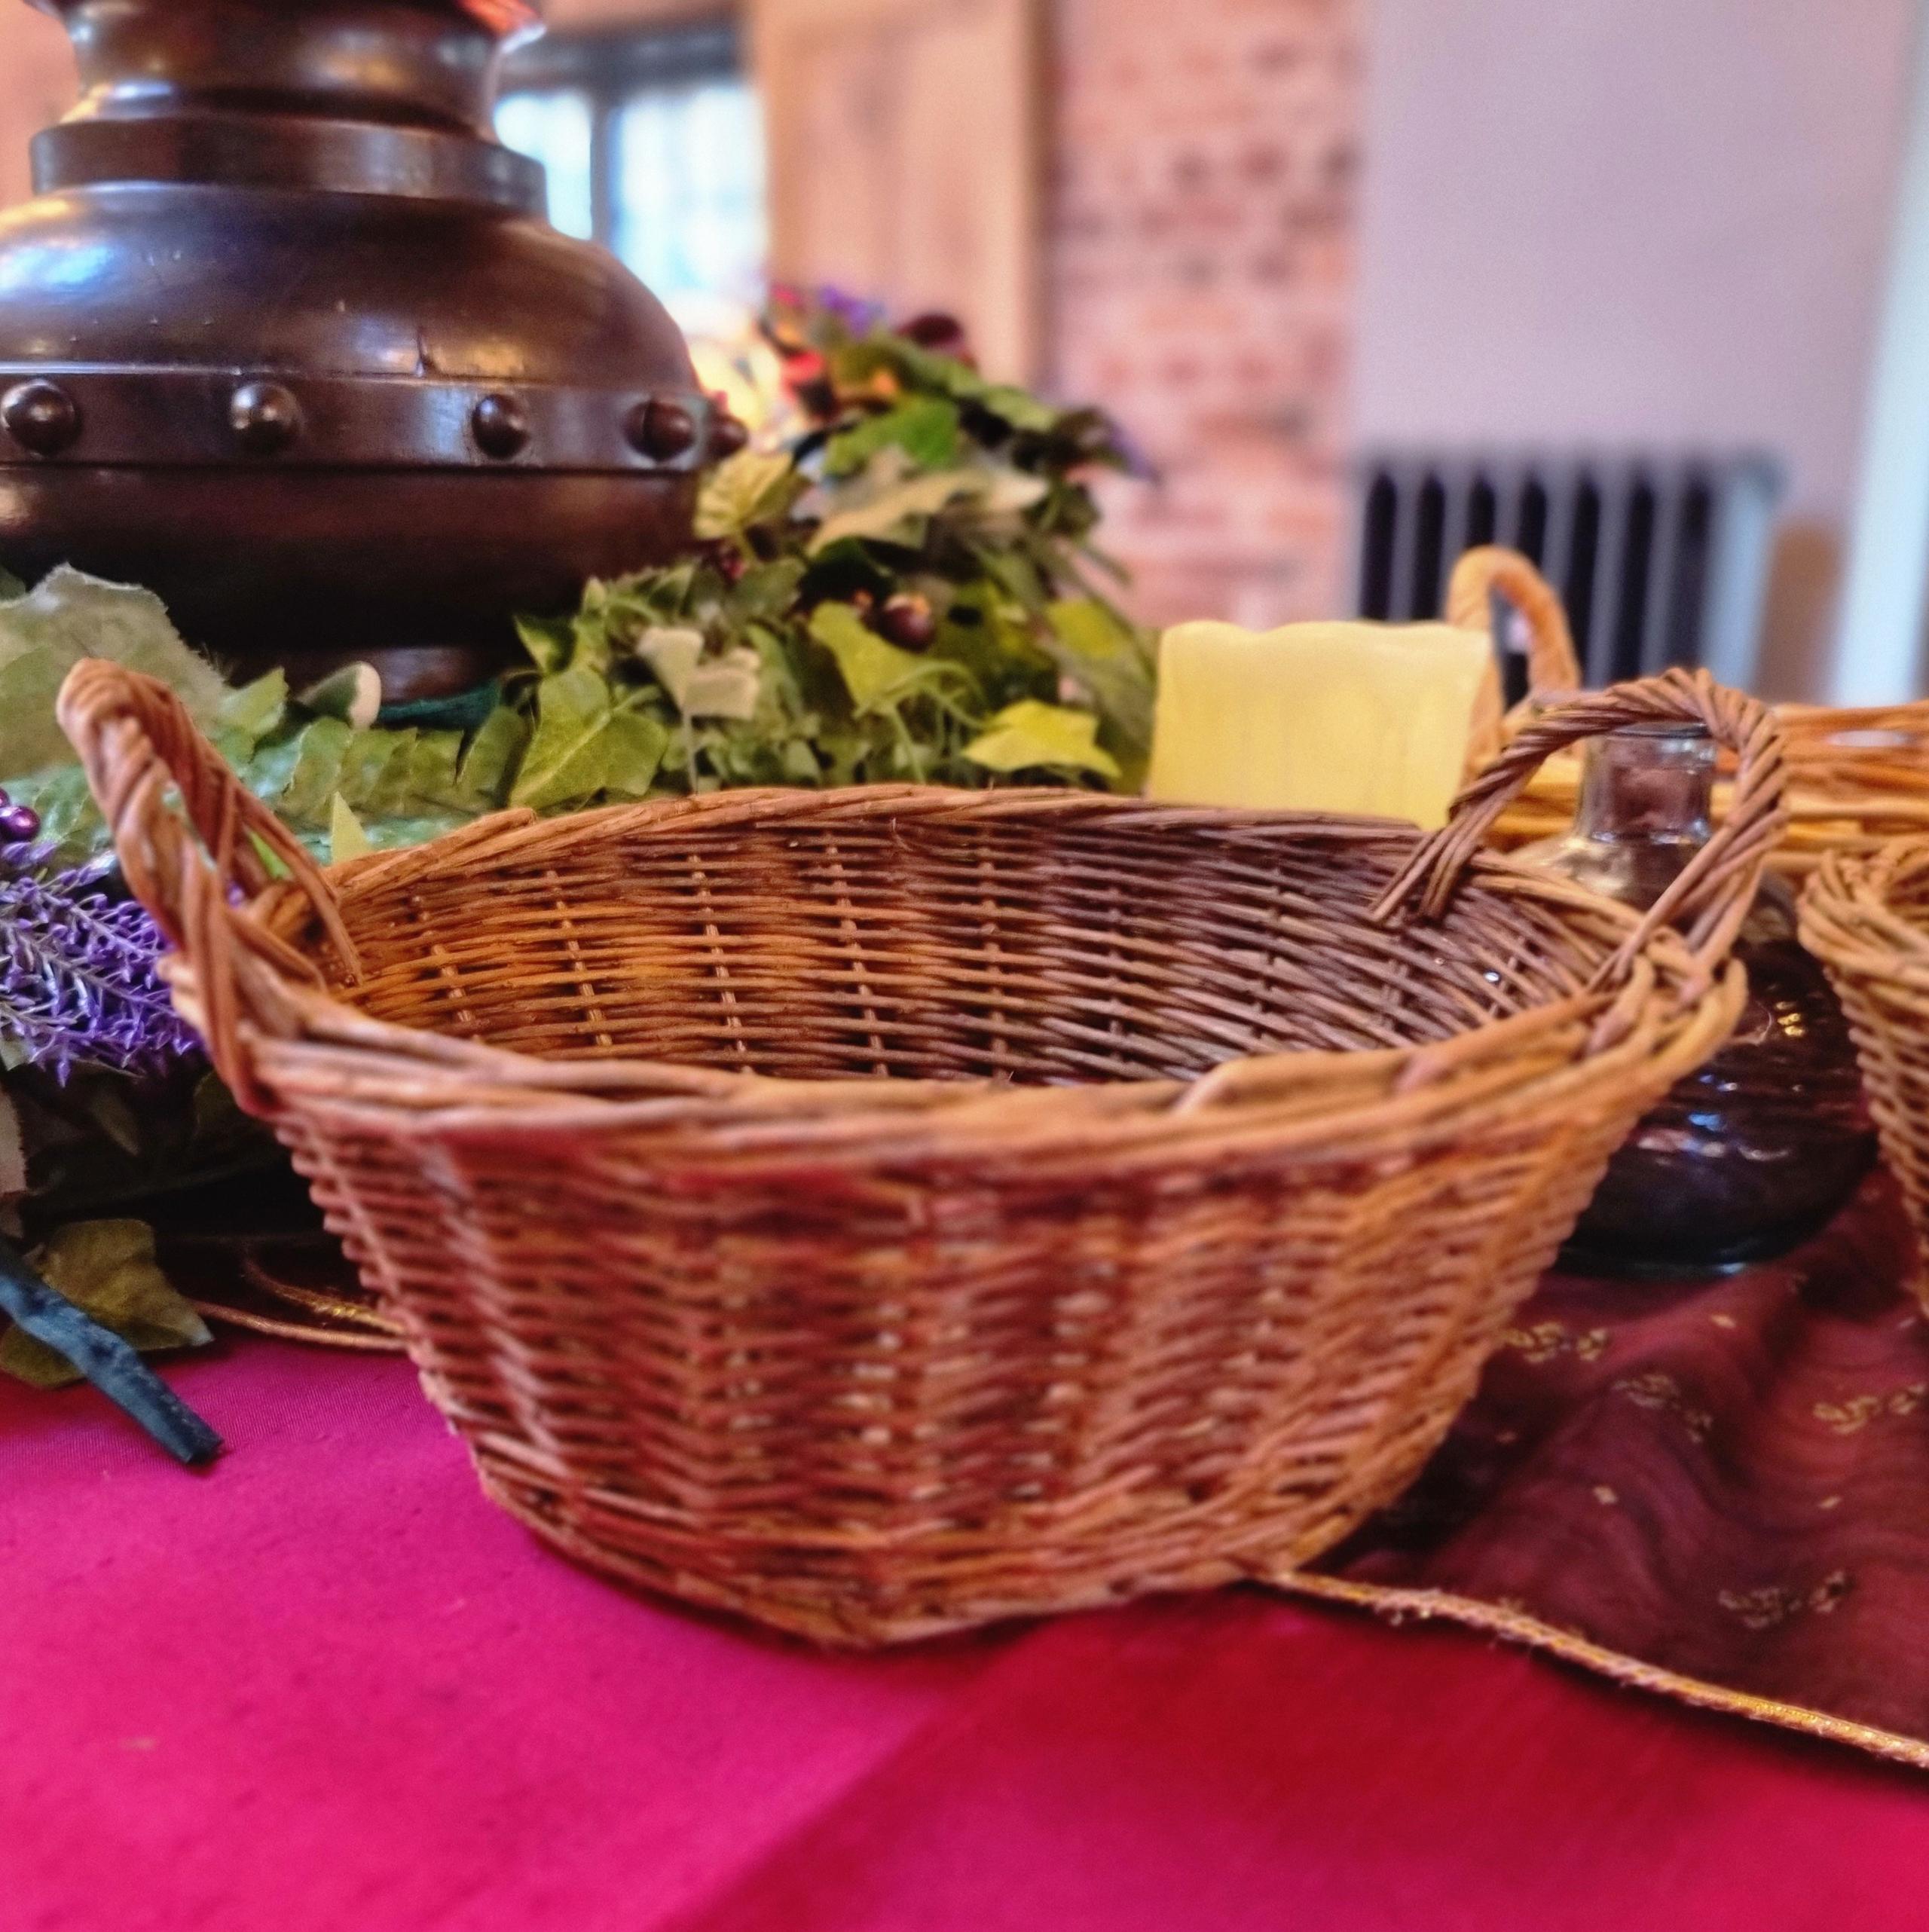 Small Baskets on burgundy table linen